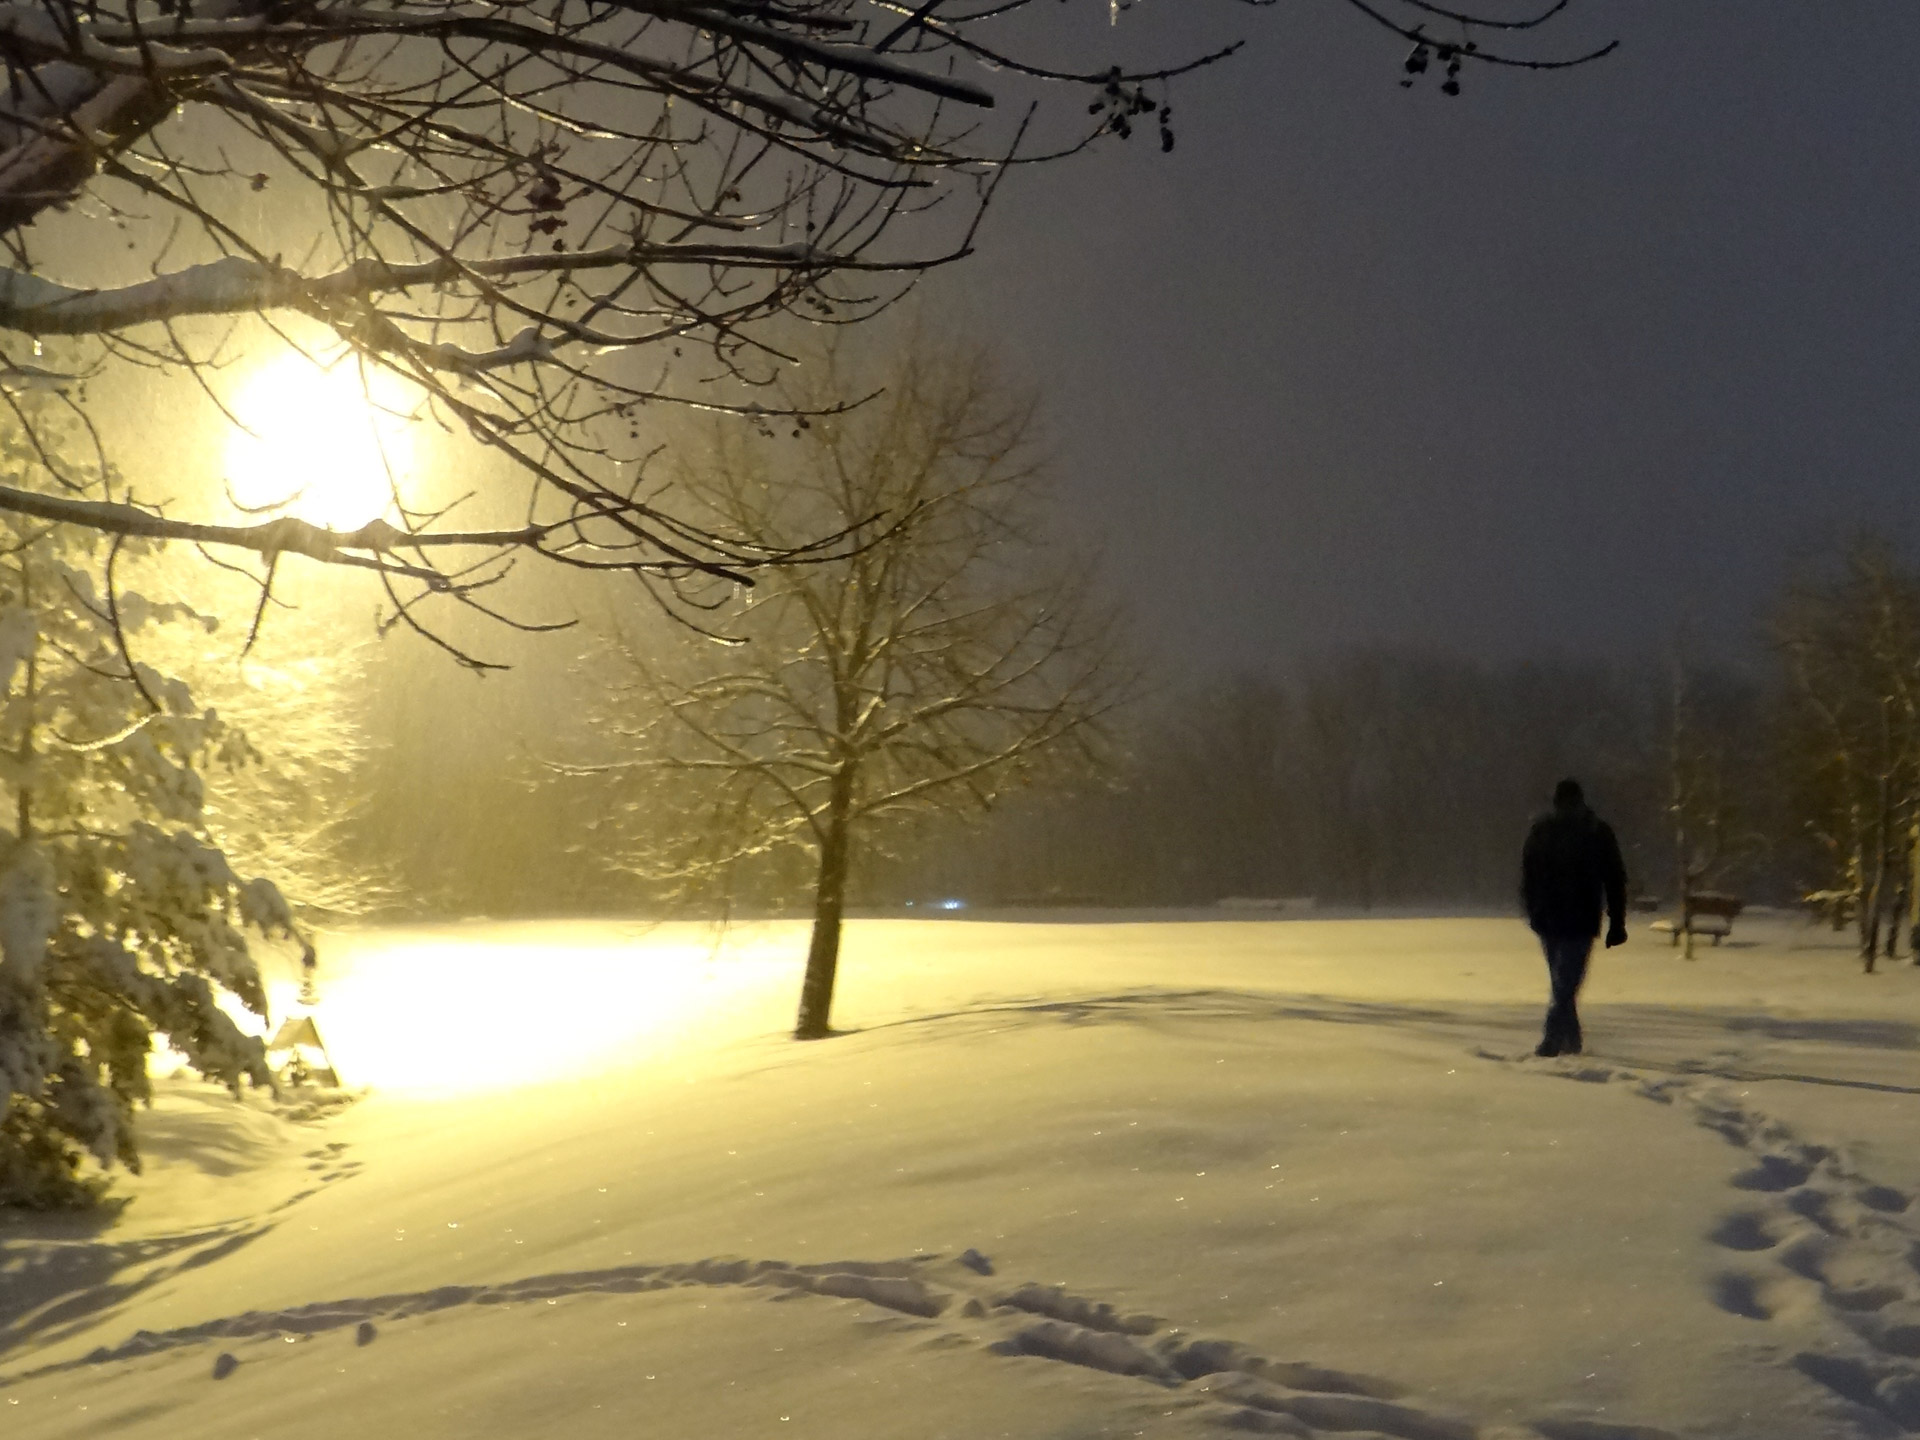 A man and his thoughts as he walks through a snowstorm in the Midwest March 5, 2013.